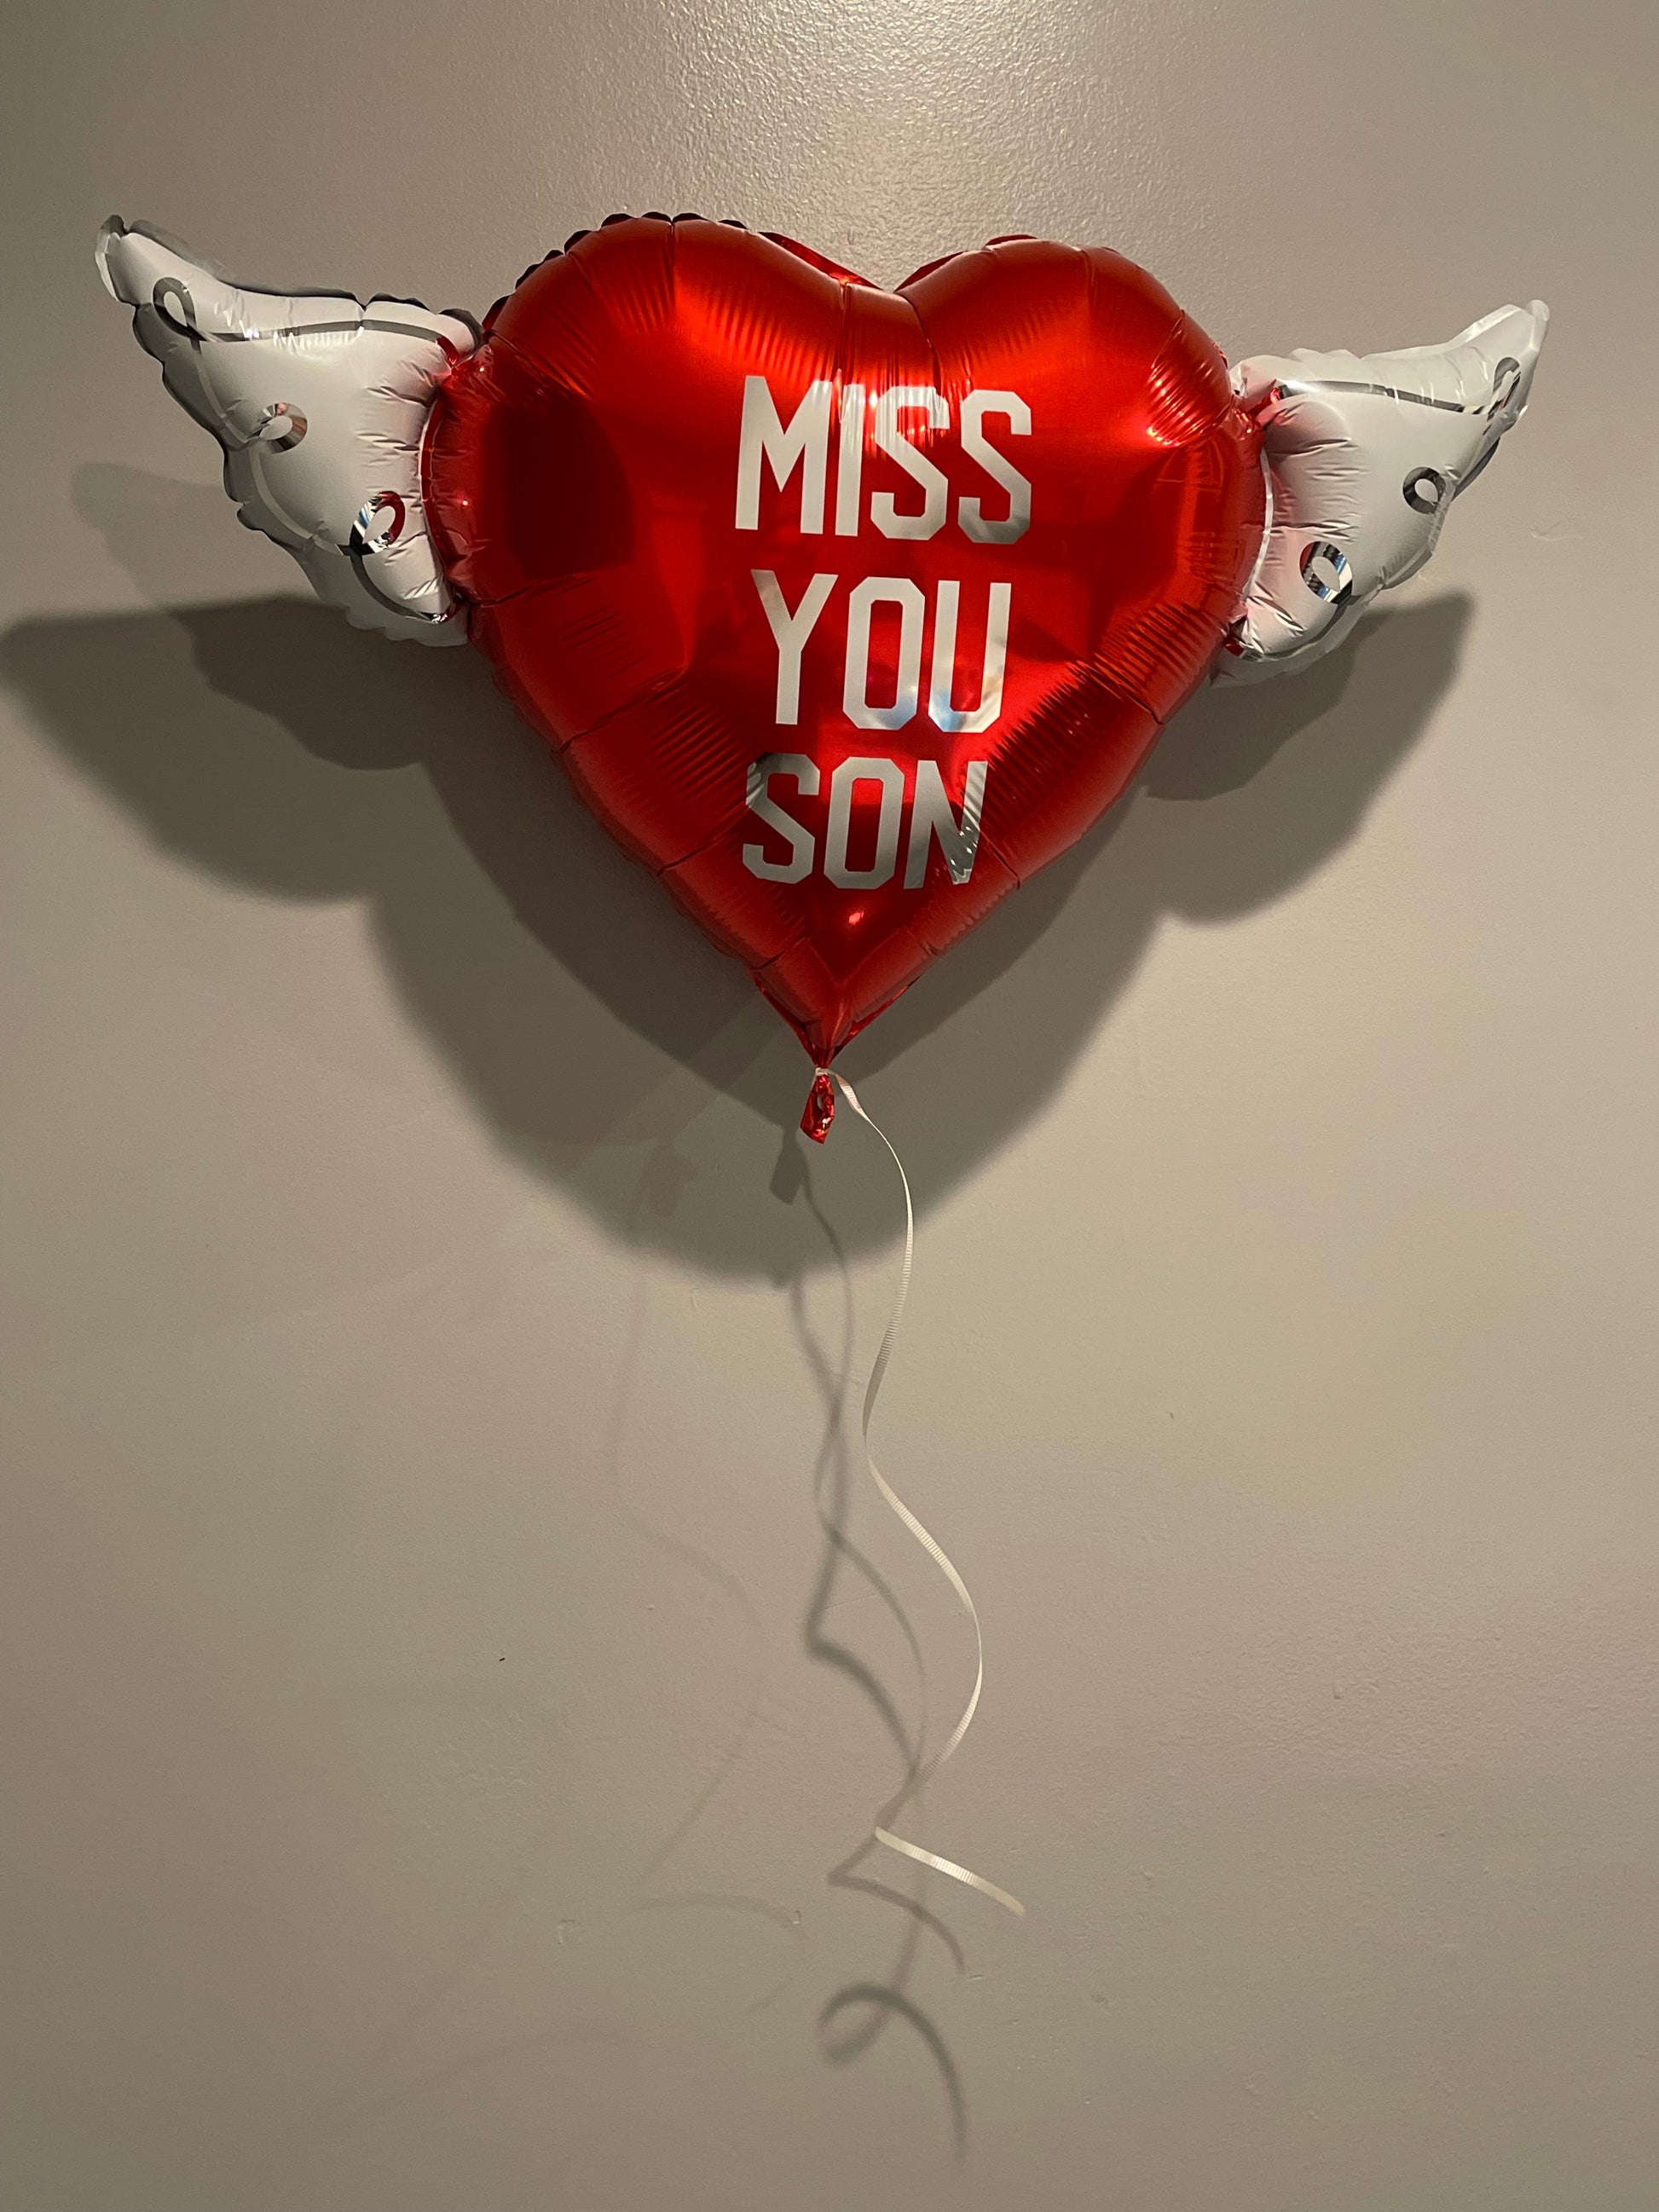 Miss You Son Heavenly Balloons ™ Heart Shaped with angel wings (Red)